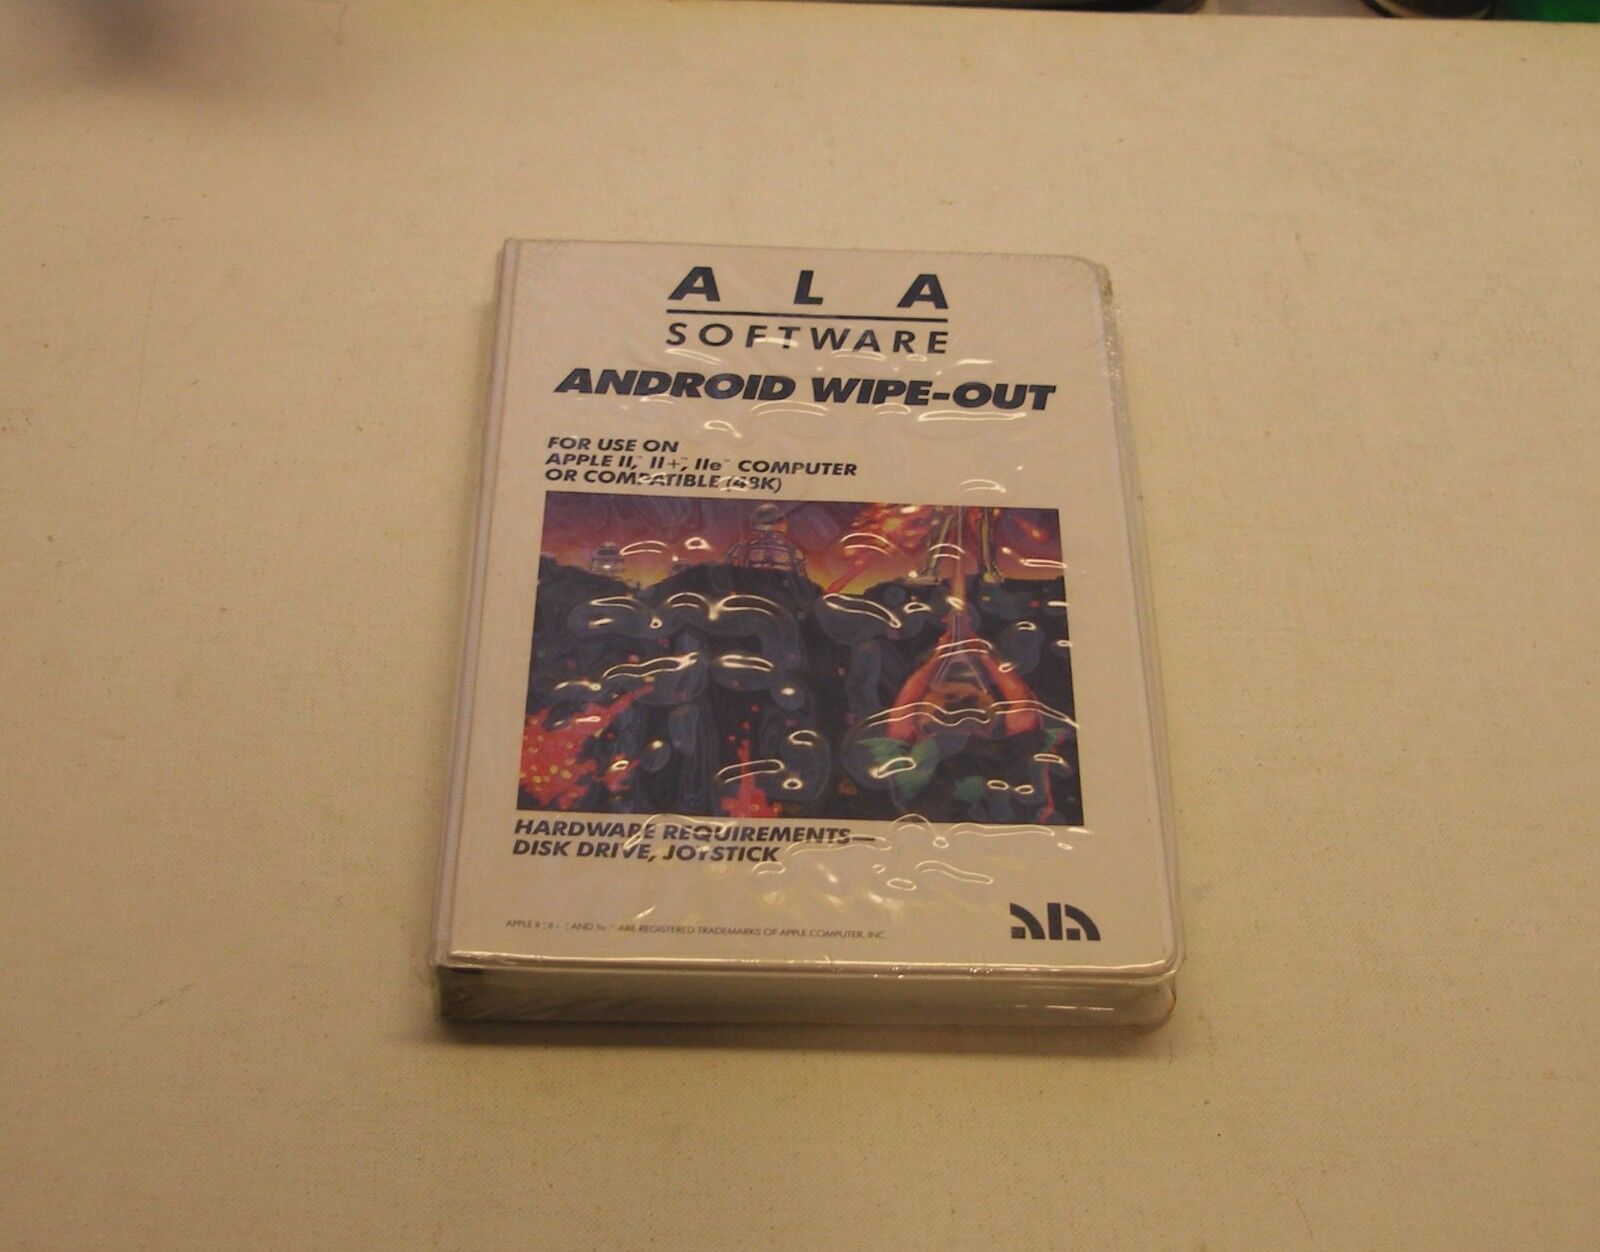 VERY RARE Android Wipe-Out by ALA Software for Apple II+, IIe, IIc, IIGS - NEW